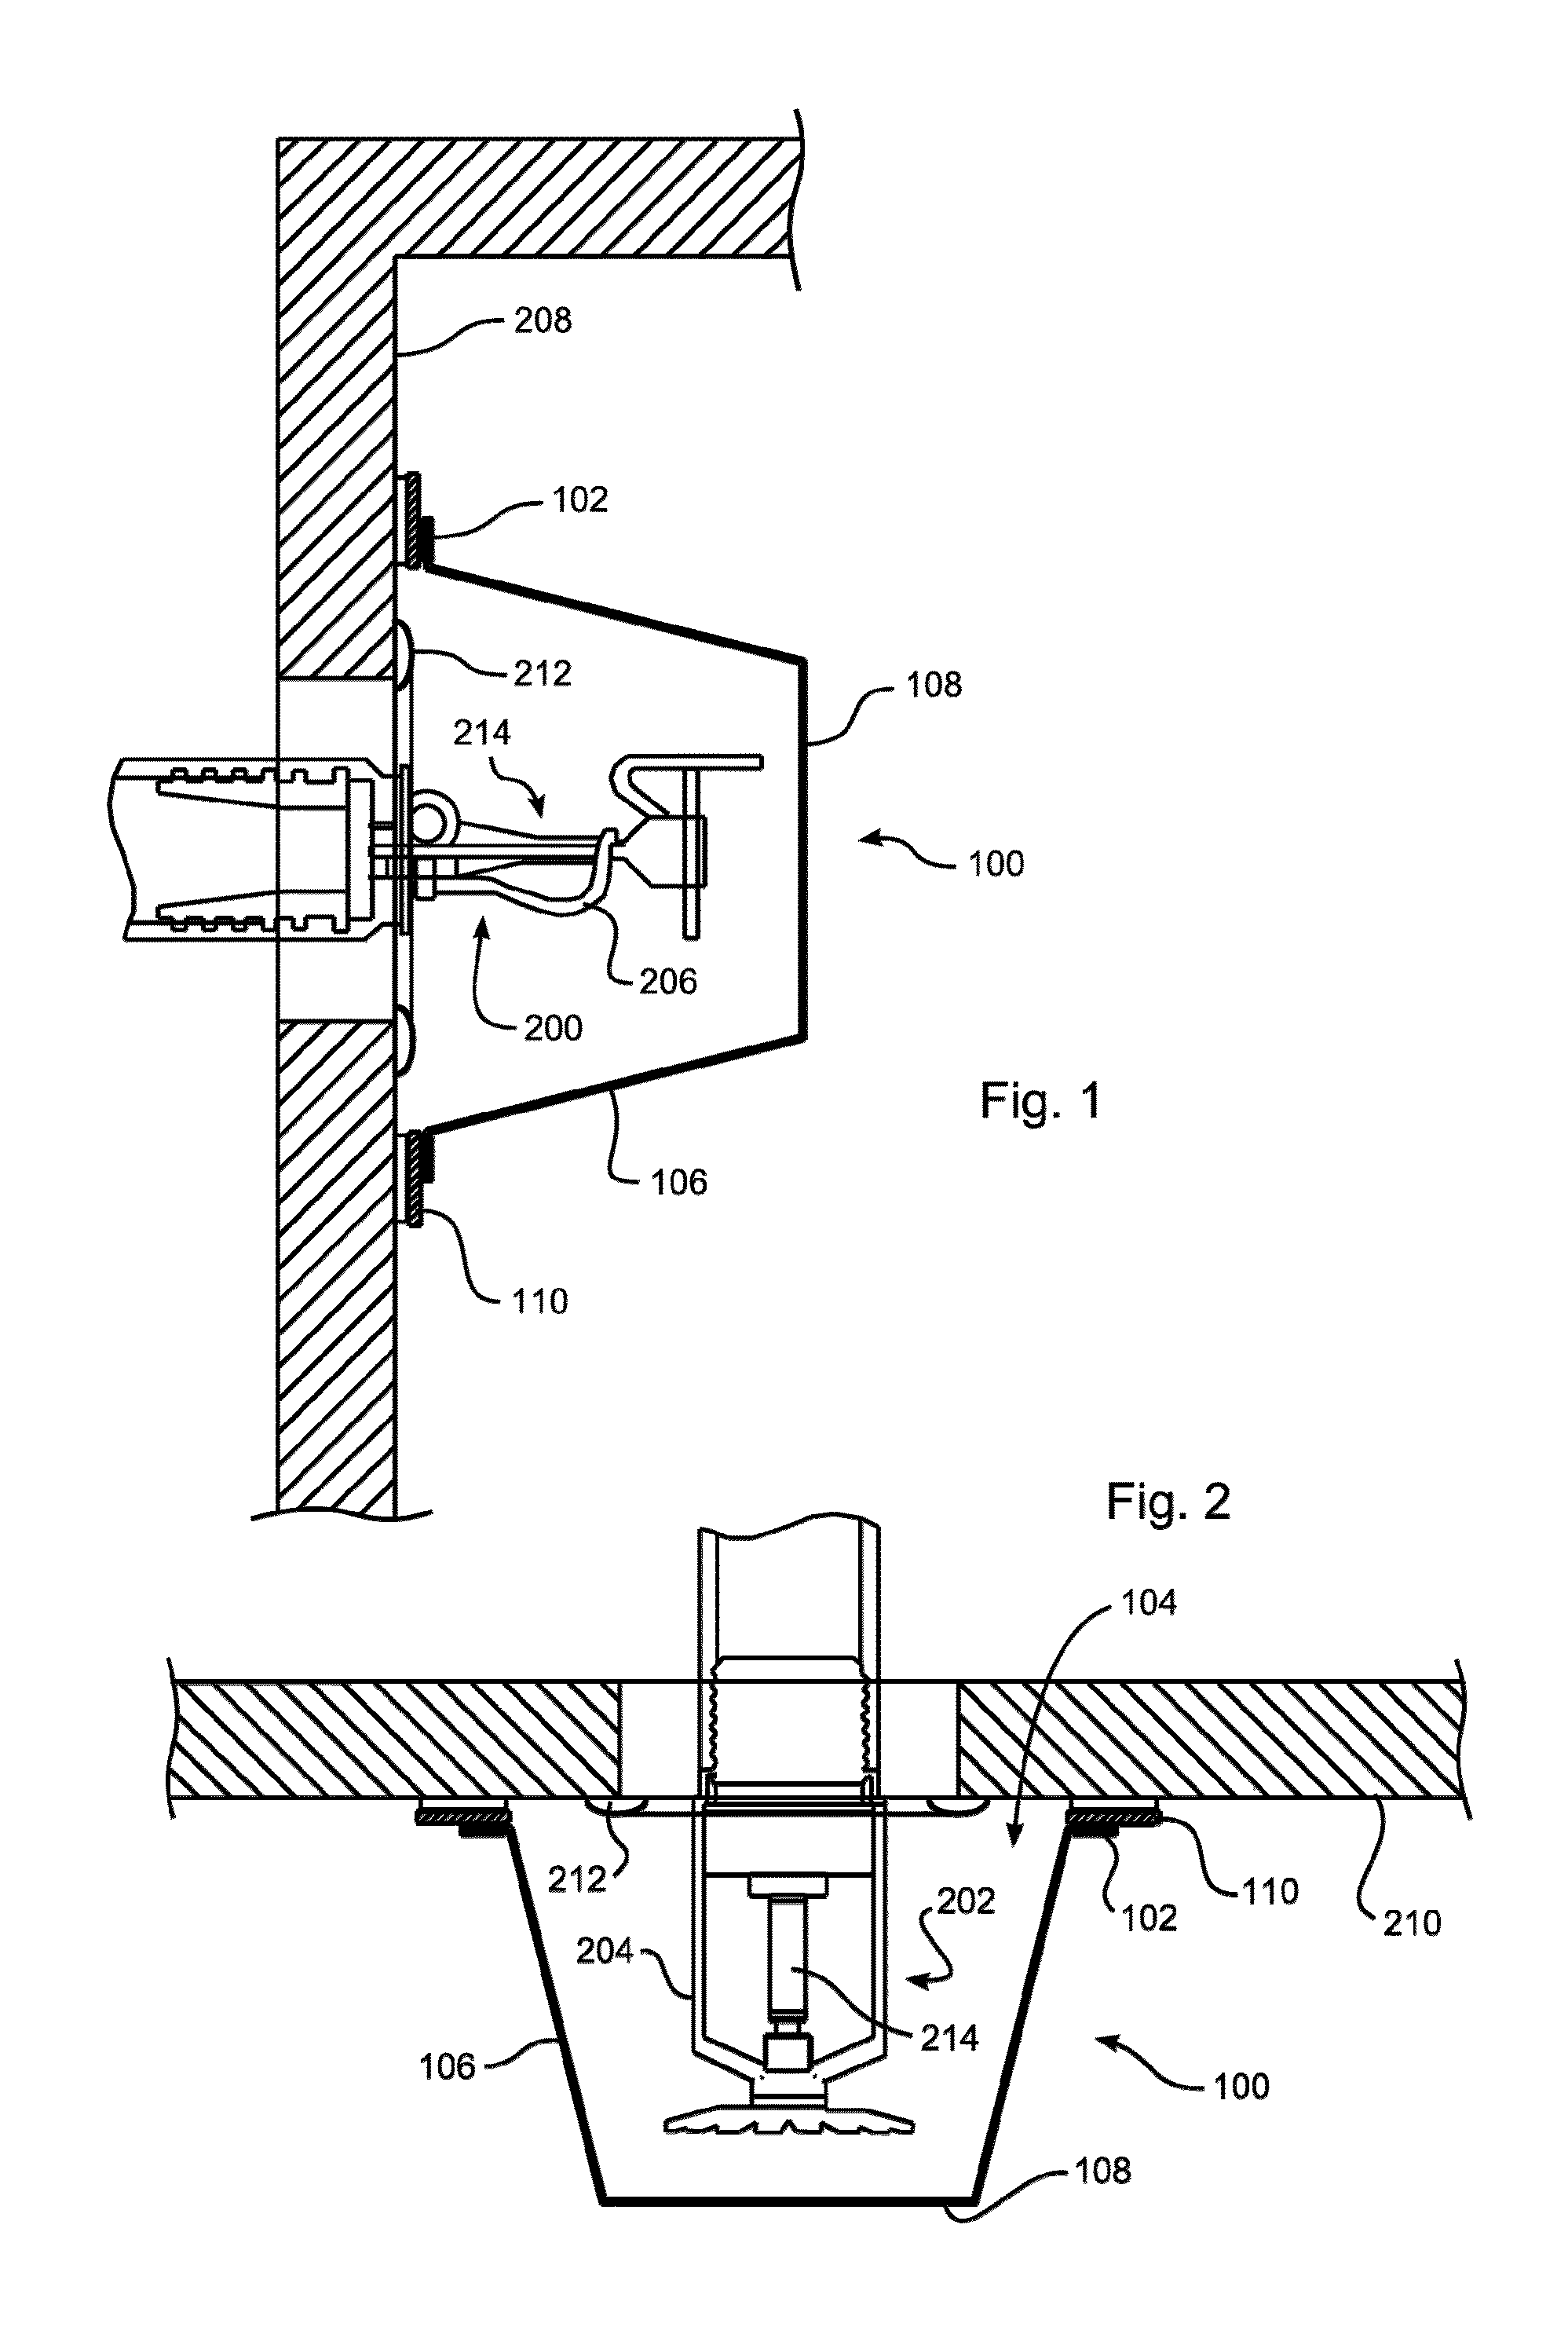 Apparatus for reducing the incidence of tampering with automatic fire sprinkler assemblies